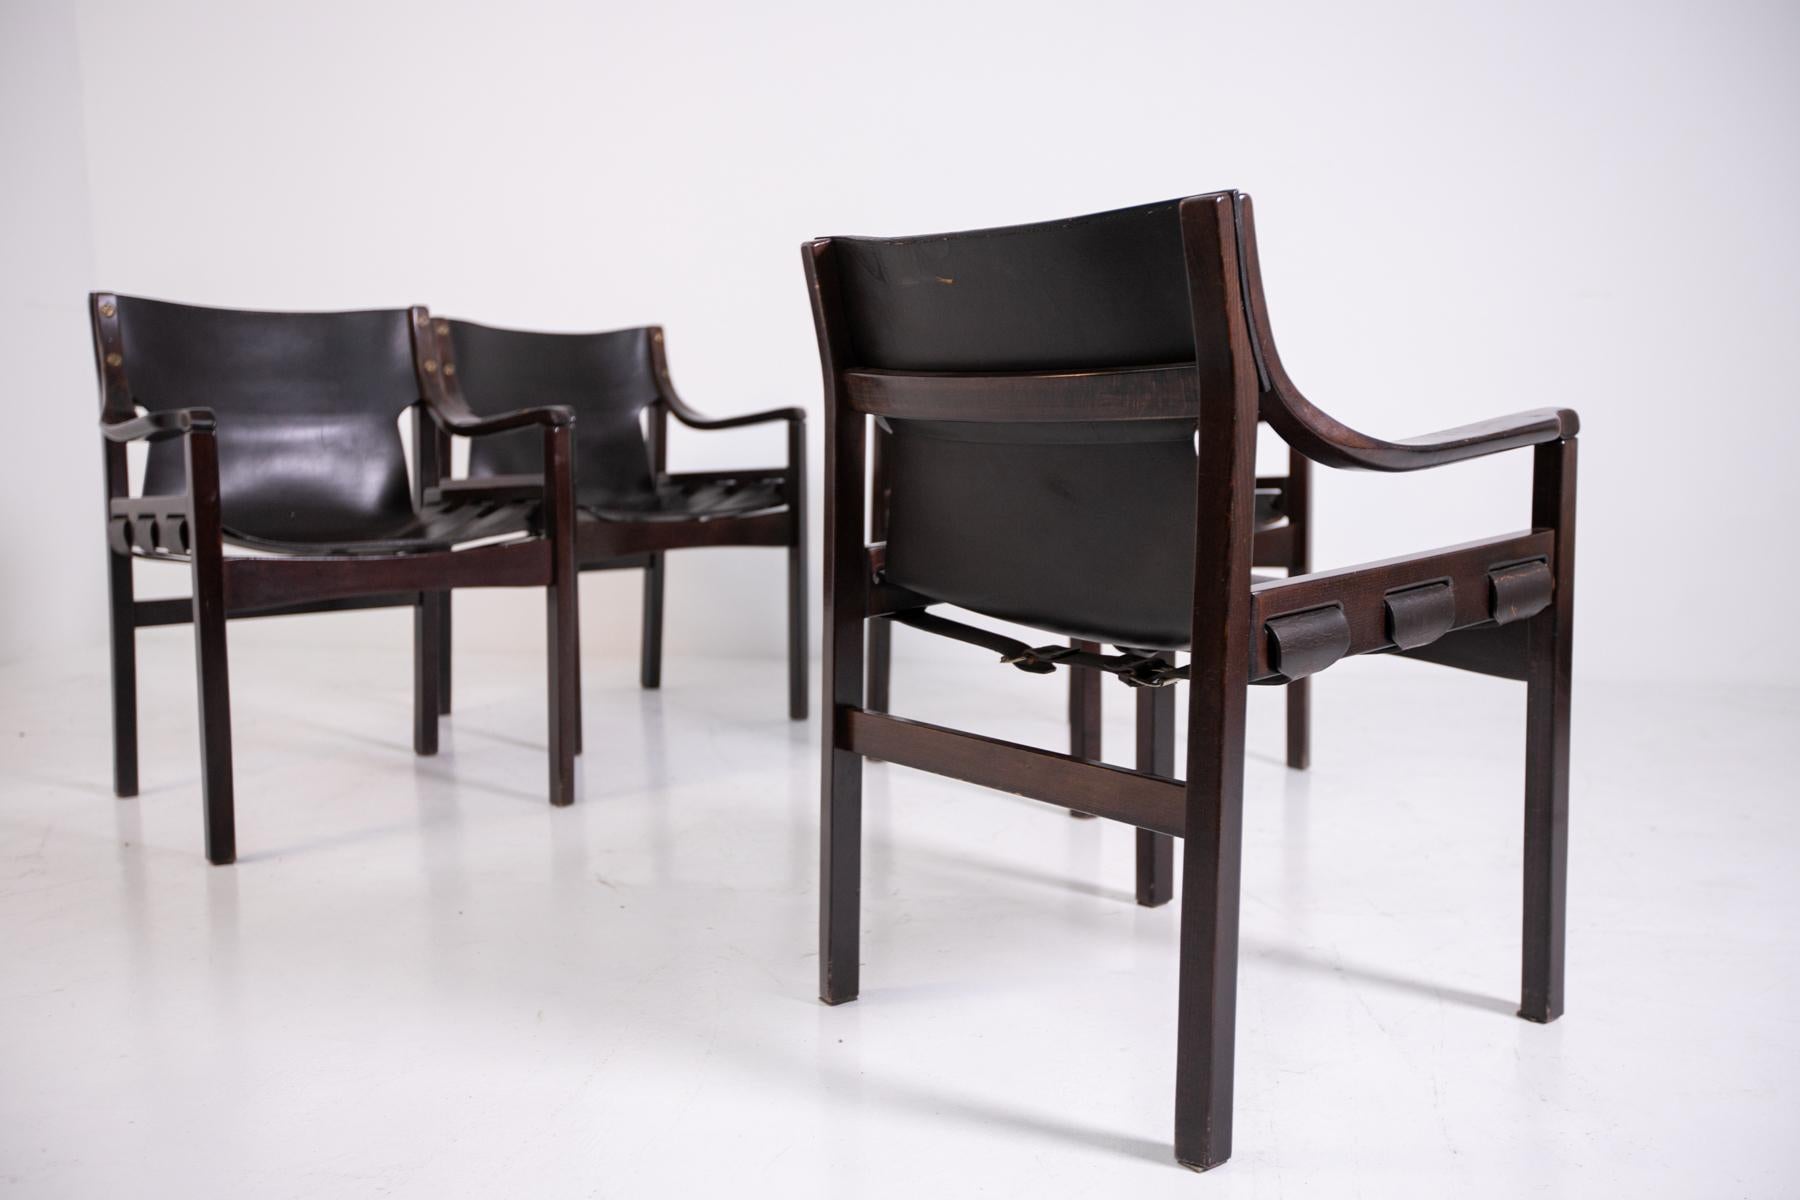 Modern Set of Leather Chairs Attributed to Gregotti, 1970s